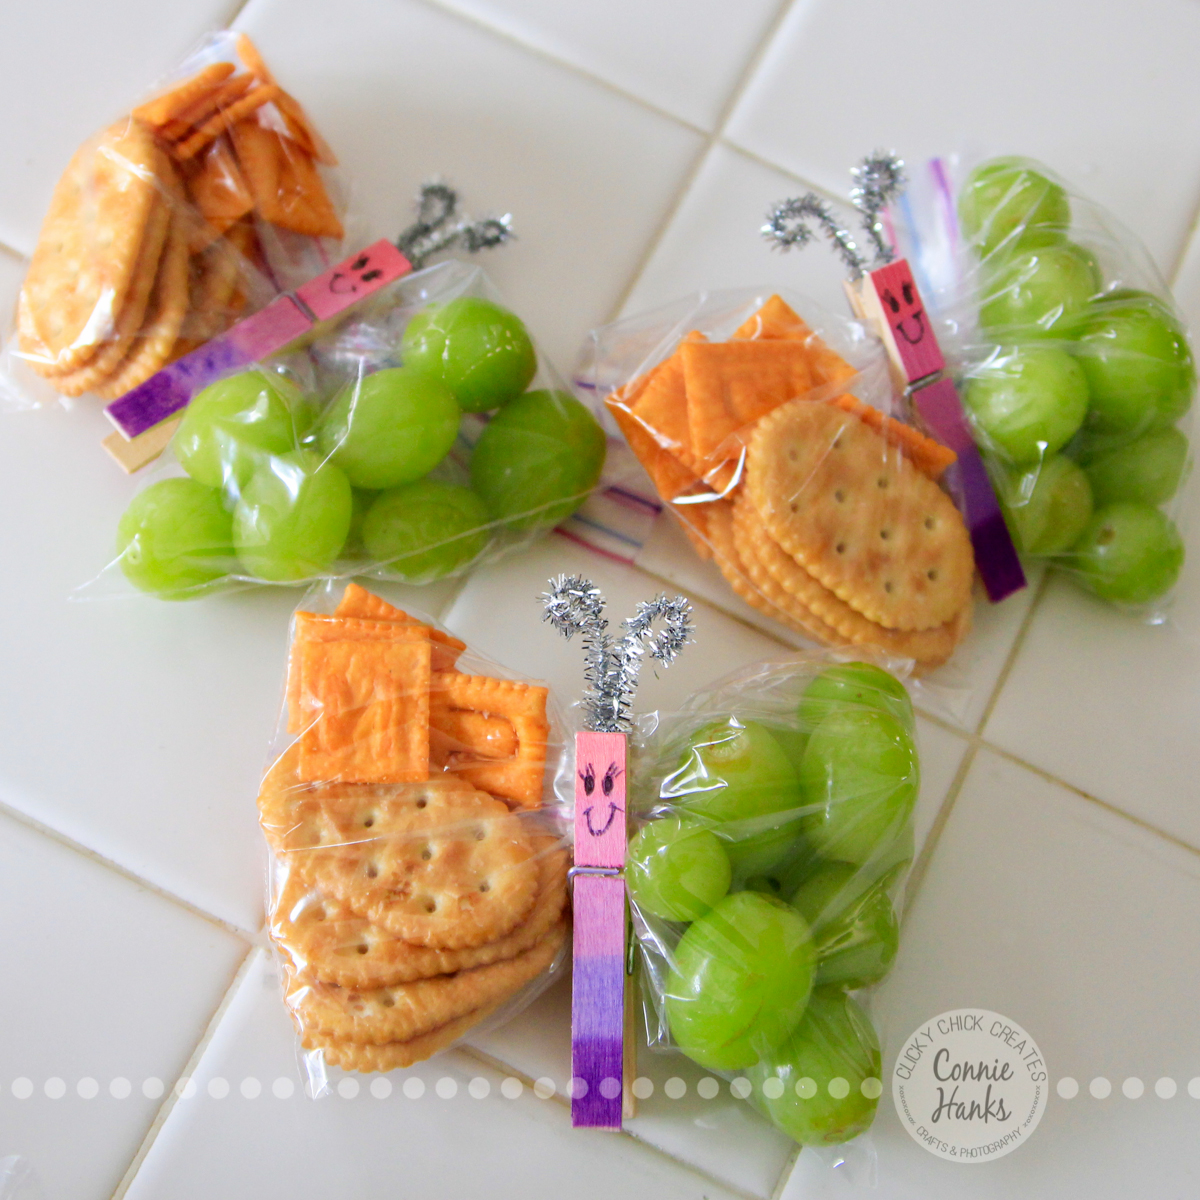 Connie Hanks Photography // ClickyChickCreates.com // healthy butterfly snacks made with baggies, clothes pins, pipe cleaner, grapes, fruit, crackers